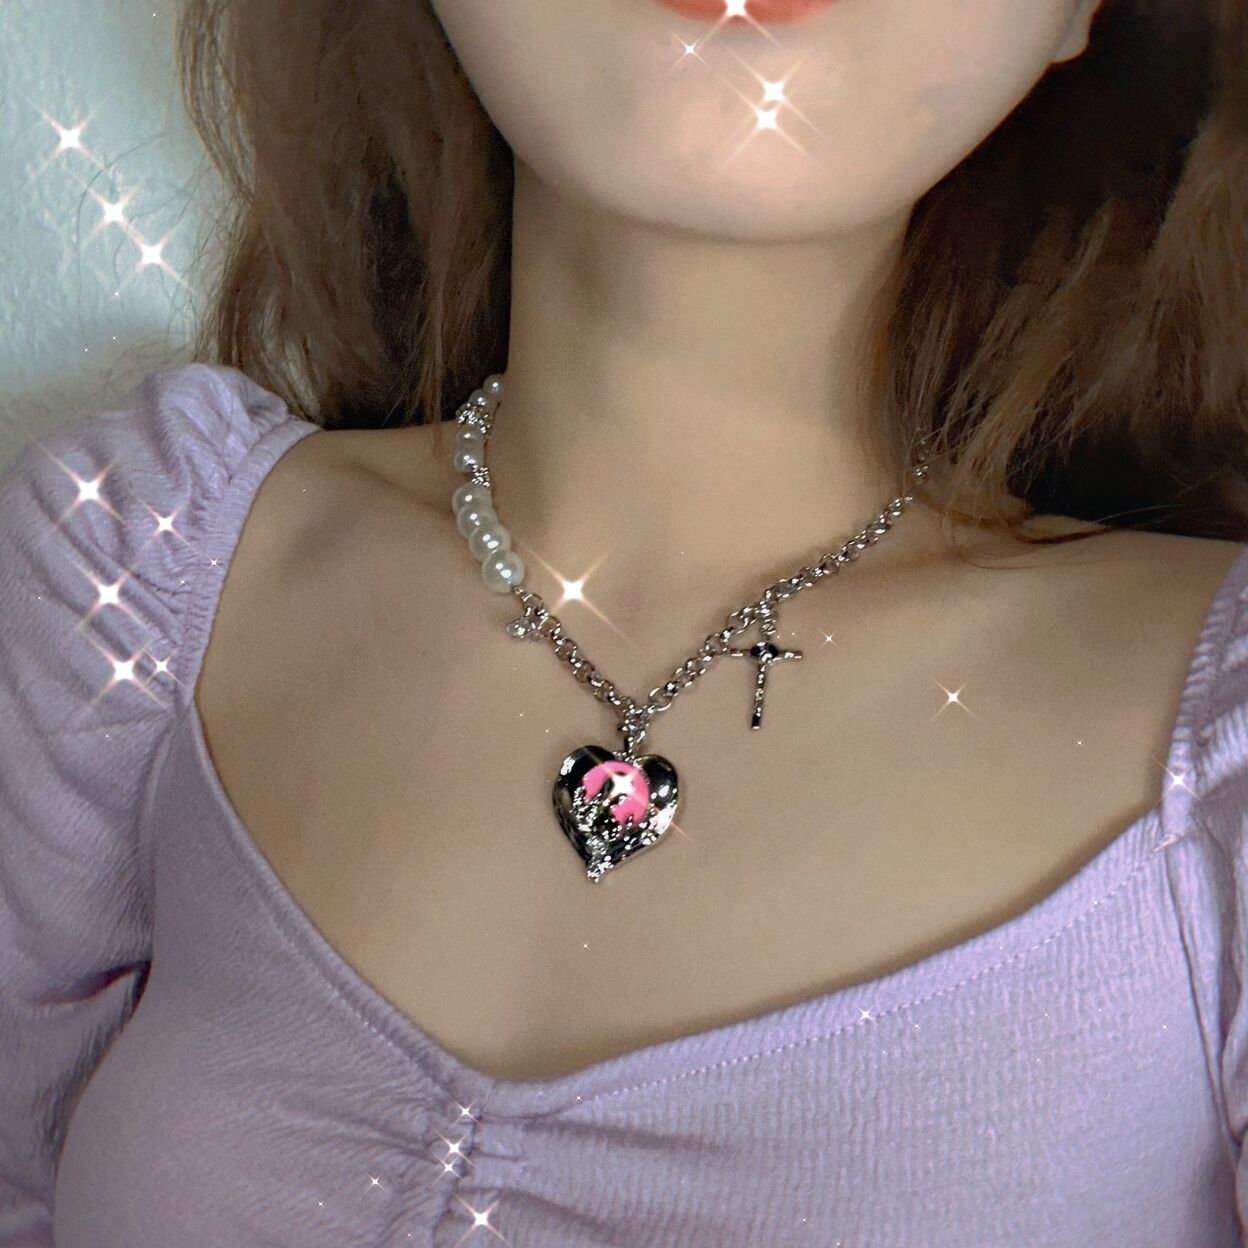 Gothic Heart Pendant Necklace for Women Choker Aesthetic Grunge Chain Pearls accessories EGIRL Indie Collar Jewelry Friends Gift